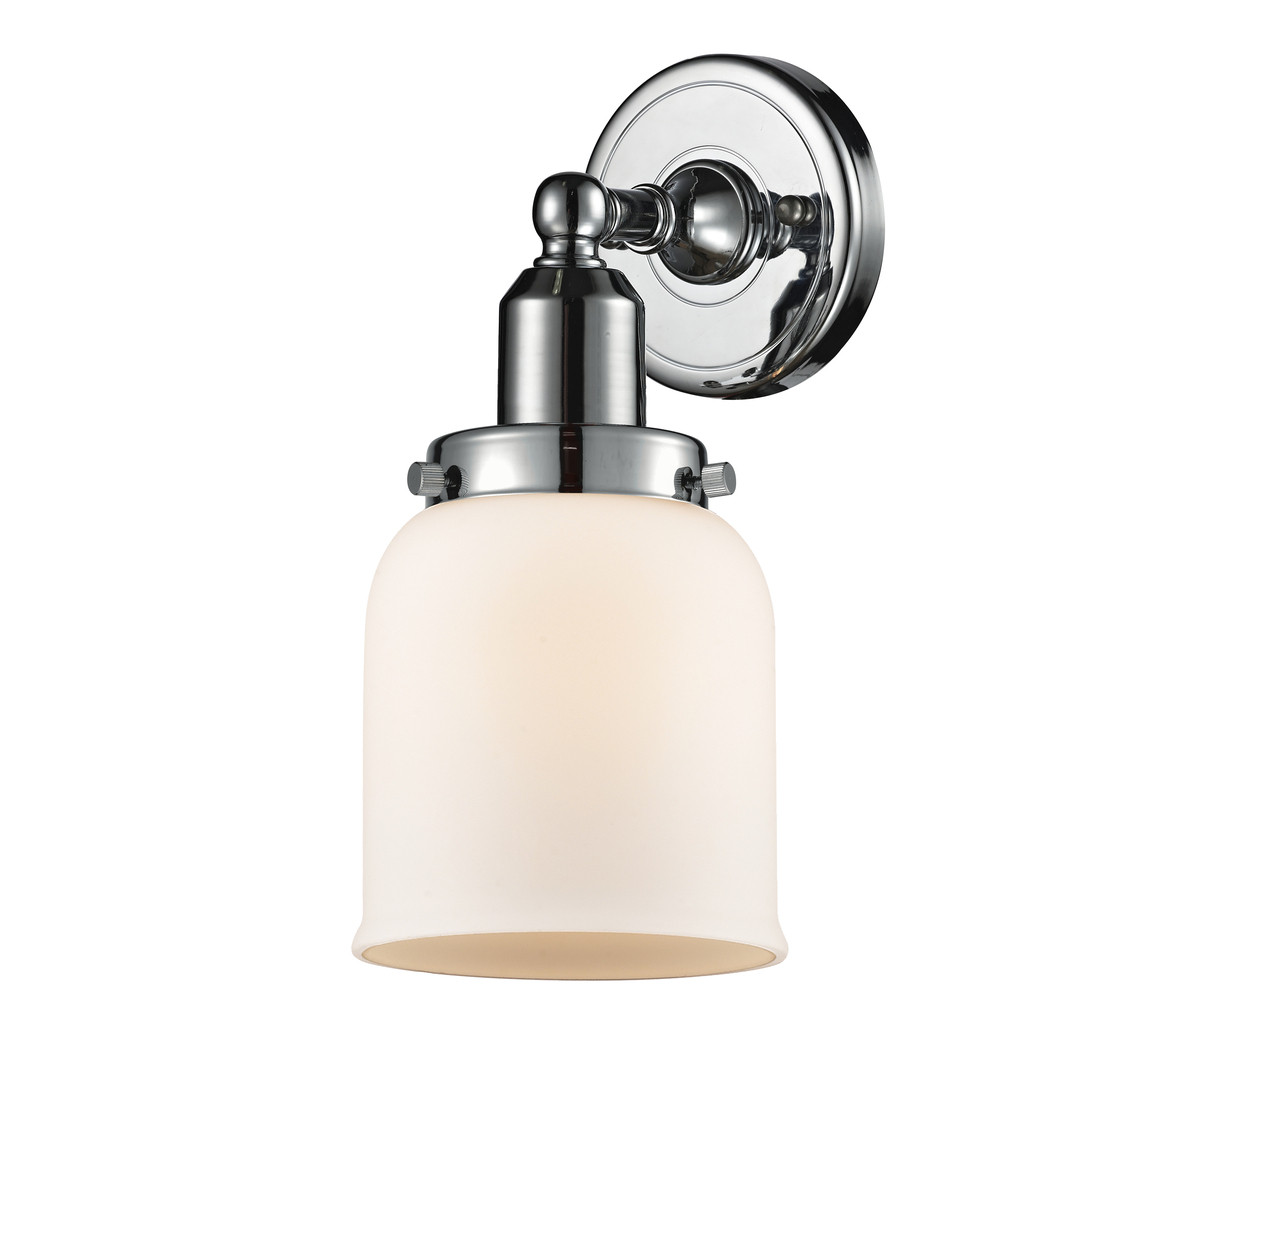 INNOVATIONS 900H-1W-PC-G51-LED Small Bell 1 Light Bath Vanity Light part of the Austere Collection Polished Chrome